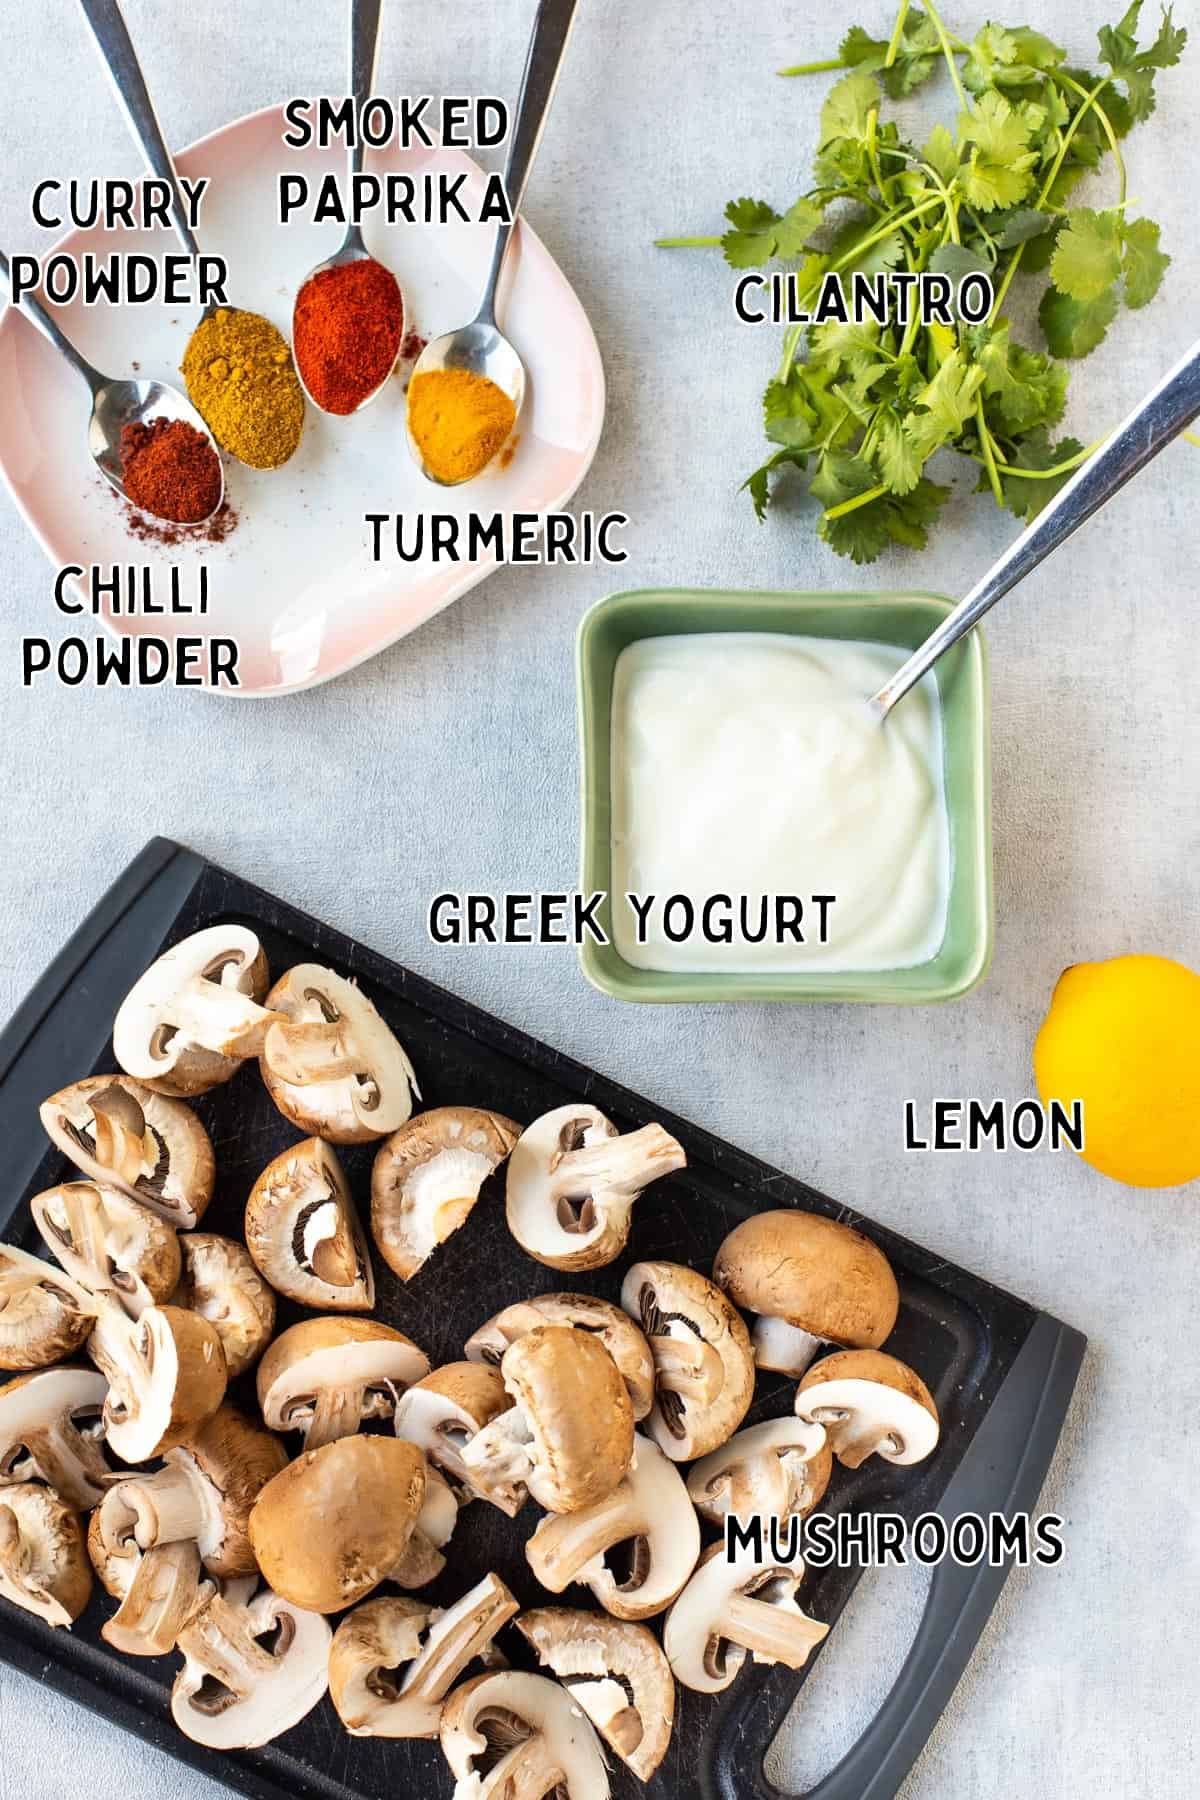 Ingredients for mushroom tikka with text overlay.